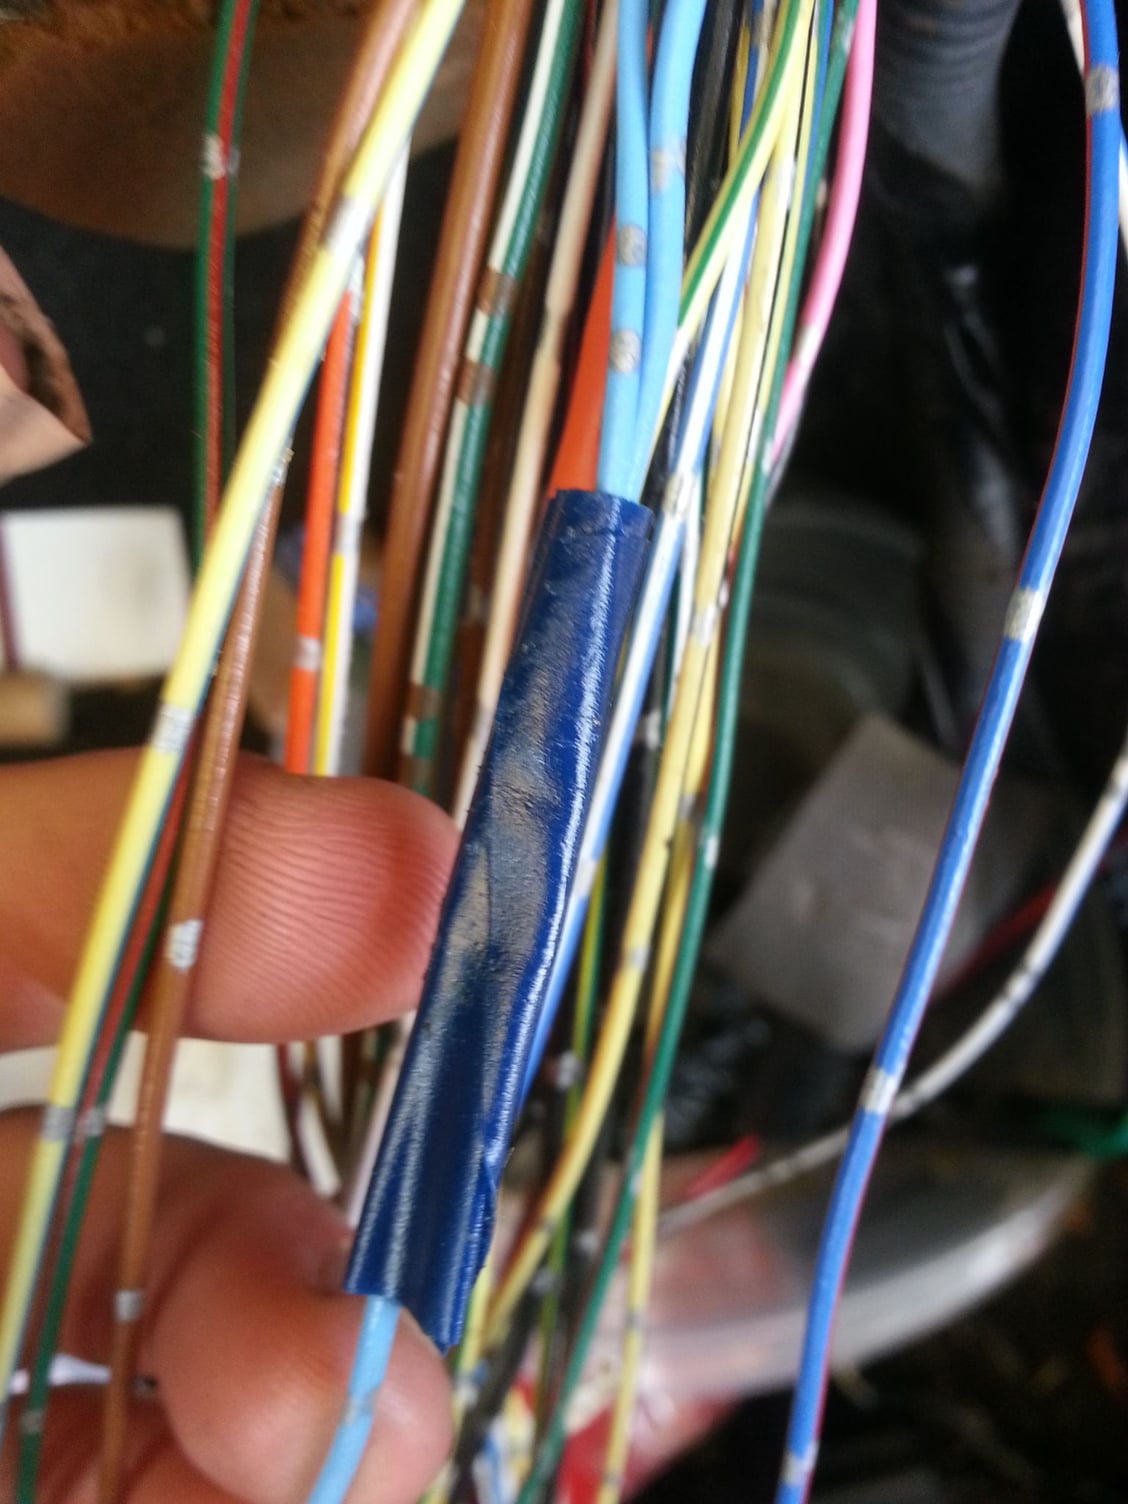 95 Civic - Is this wiring harness factory correct or modified? - Honda